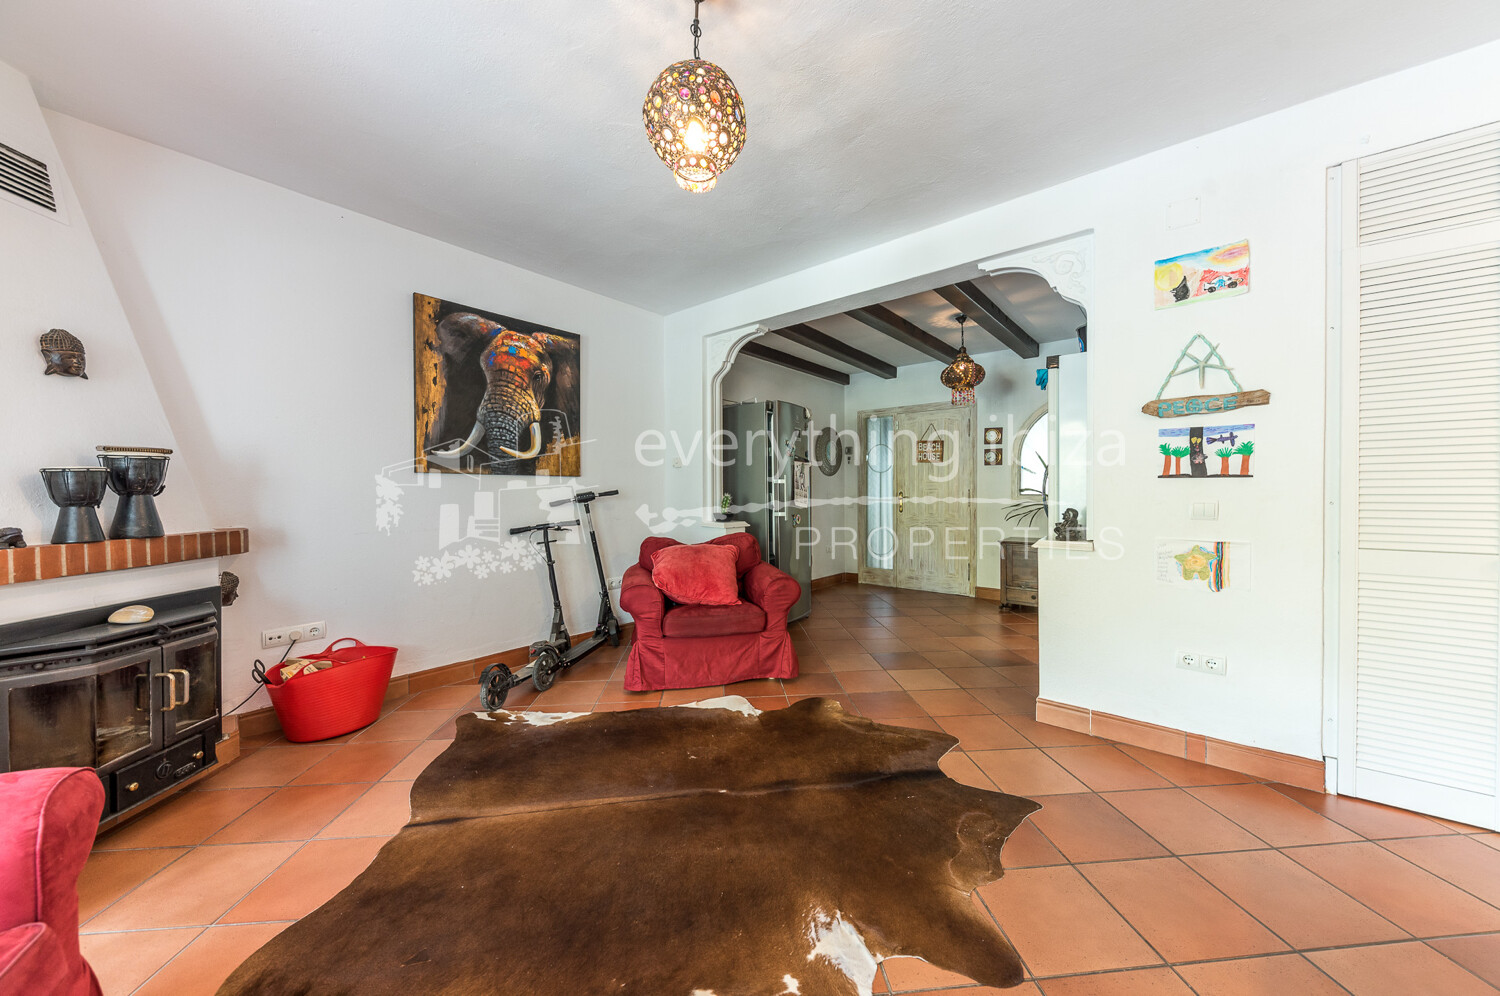 Lovely Detached Villa Close to Cala Vadella & Popular Beaches, ref. 1533, for sale in Ibiza by everything ibiza Properties